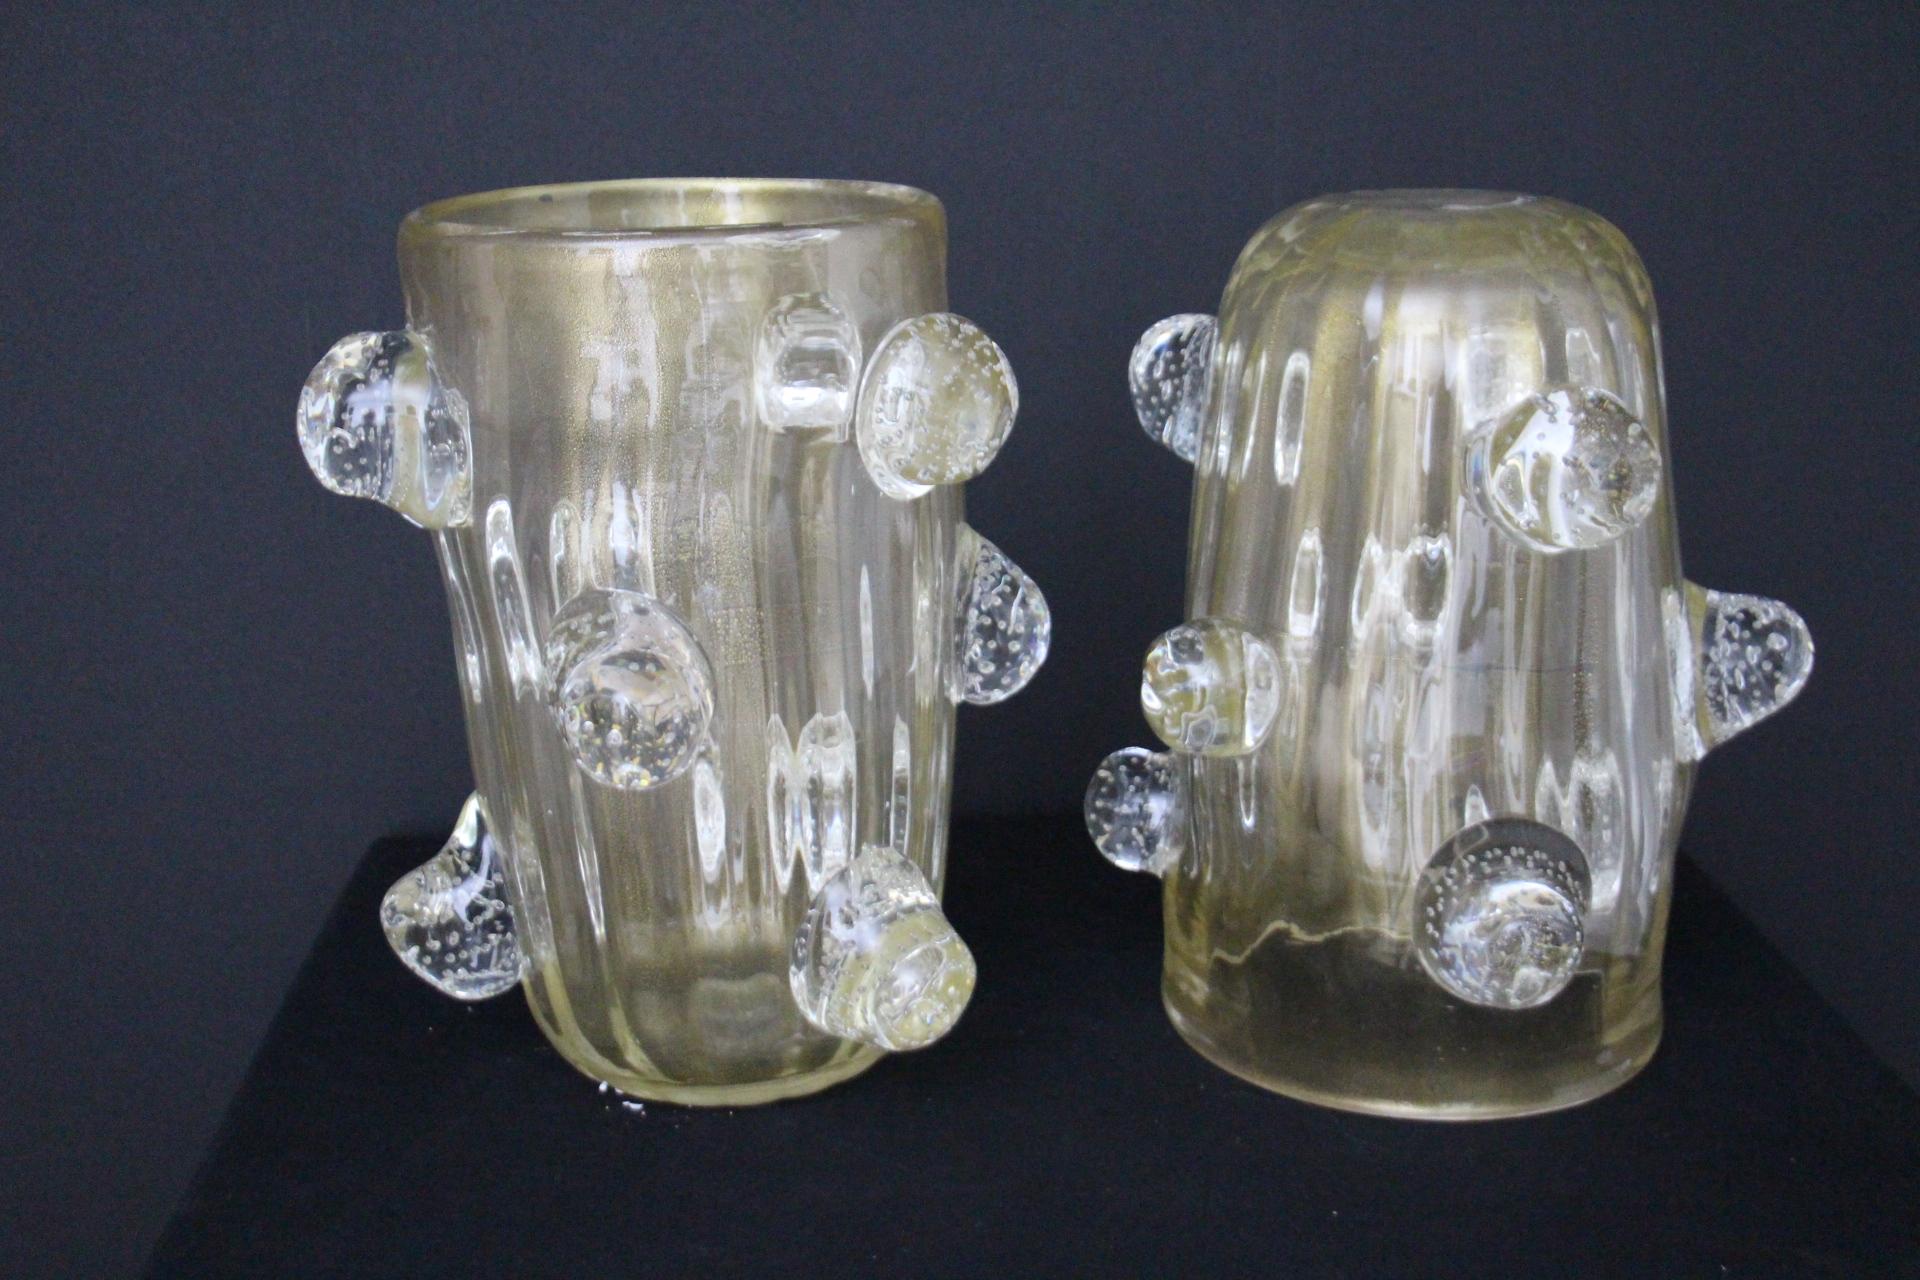 Pair of Large Golden Murano Glass Vases With Bubbles Balls Decor by Costantini For Sale 3